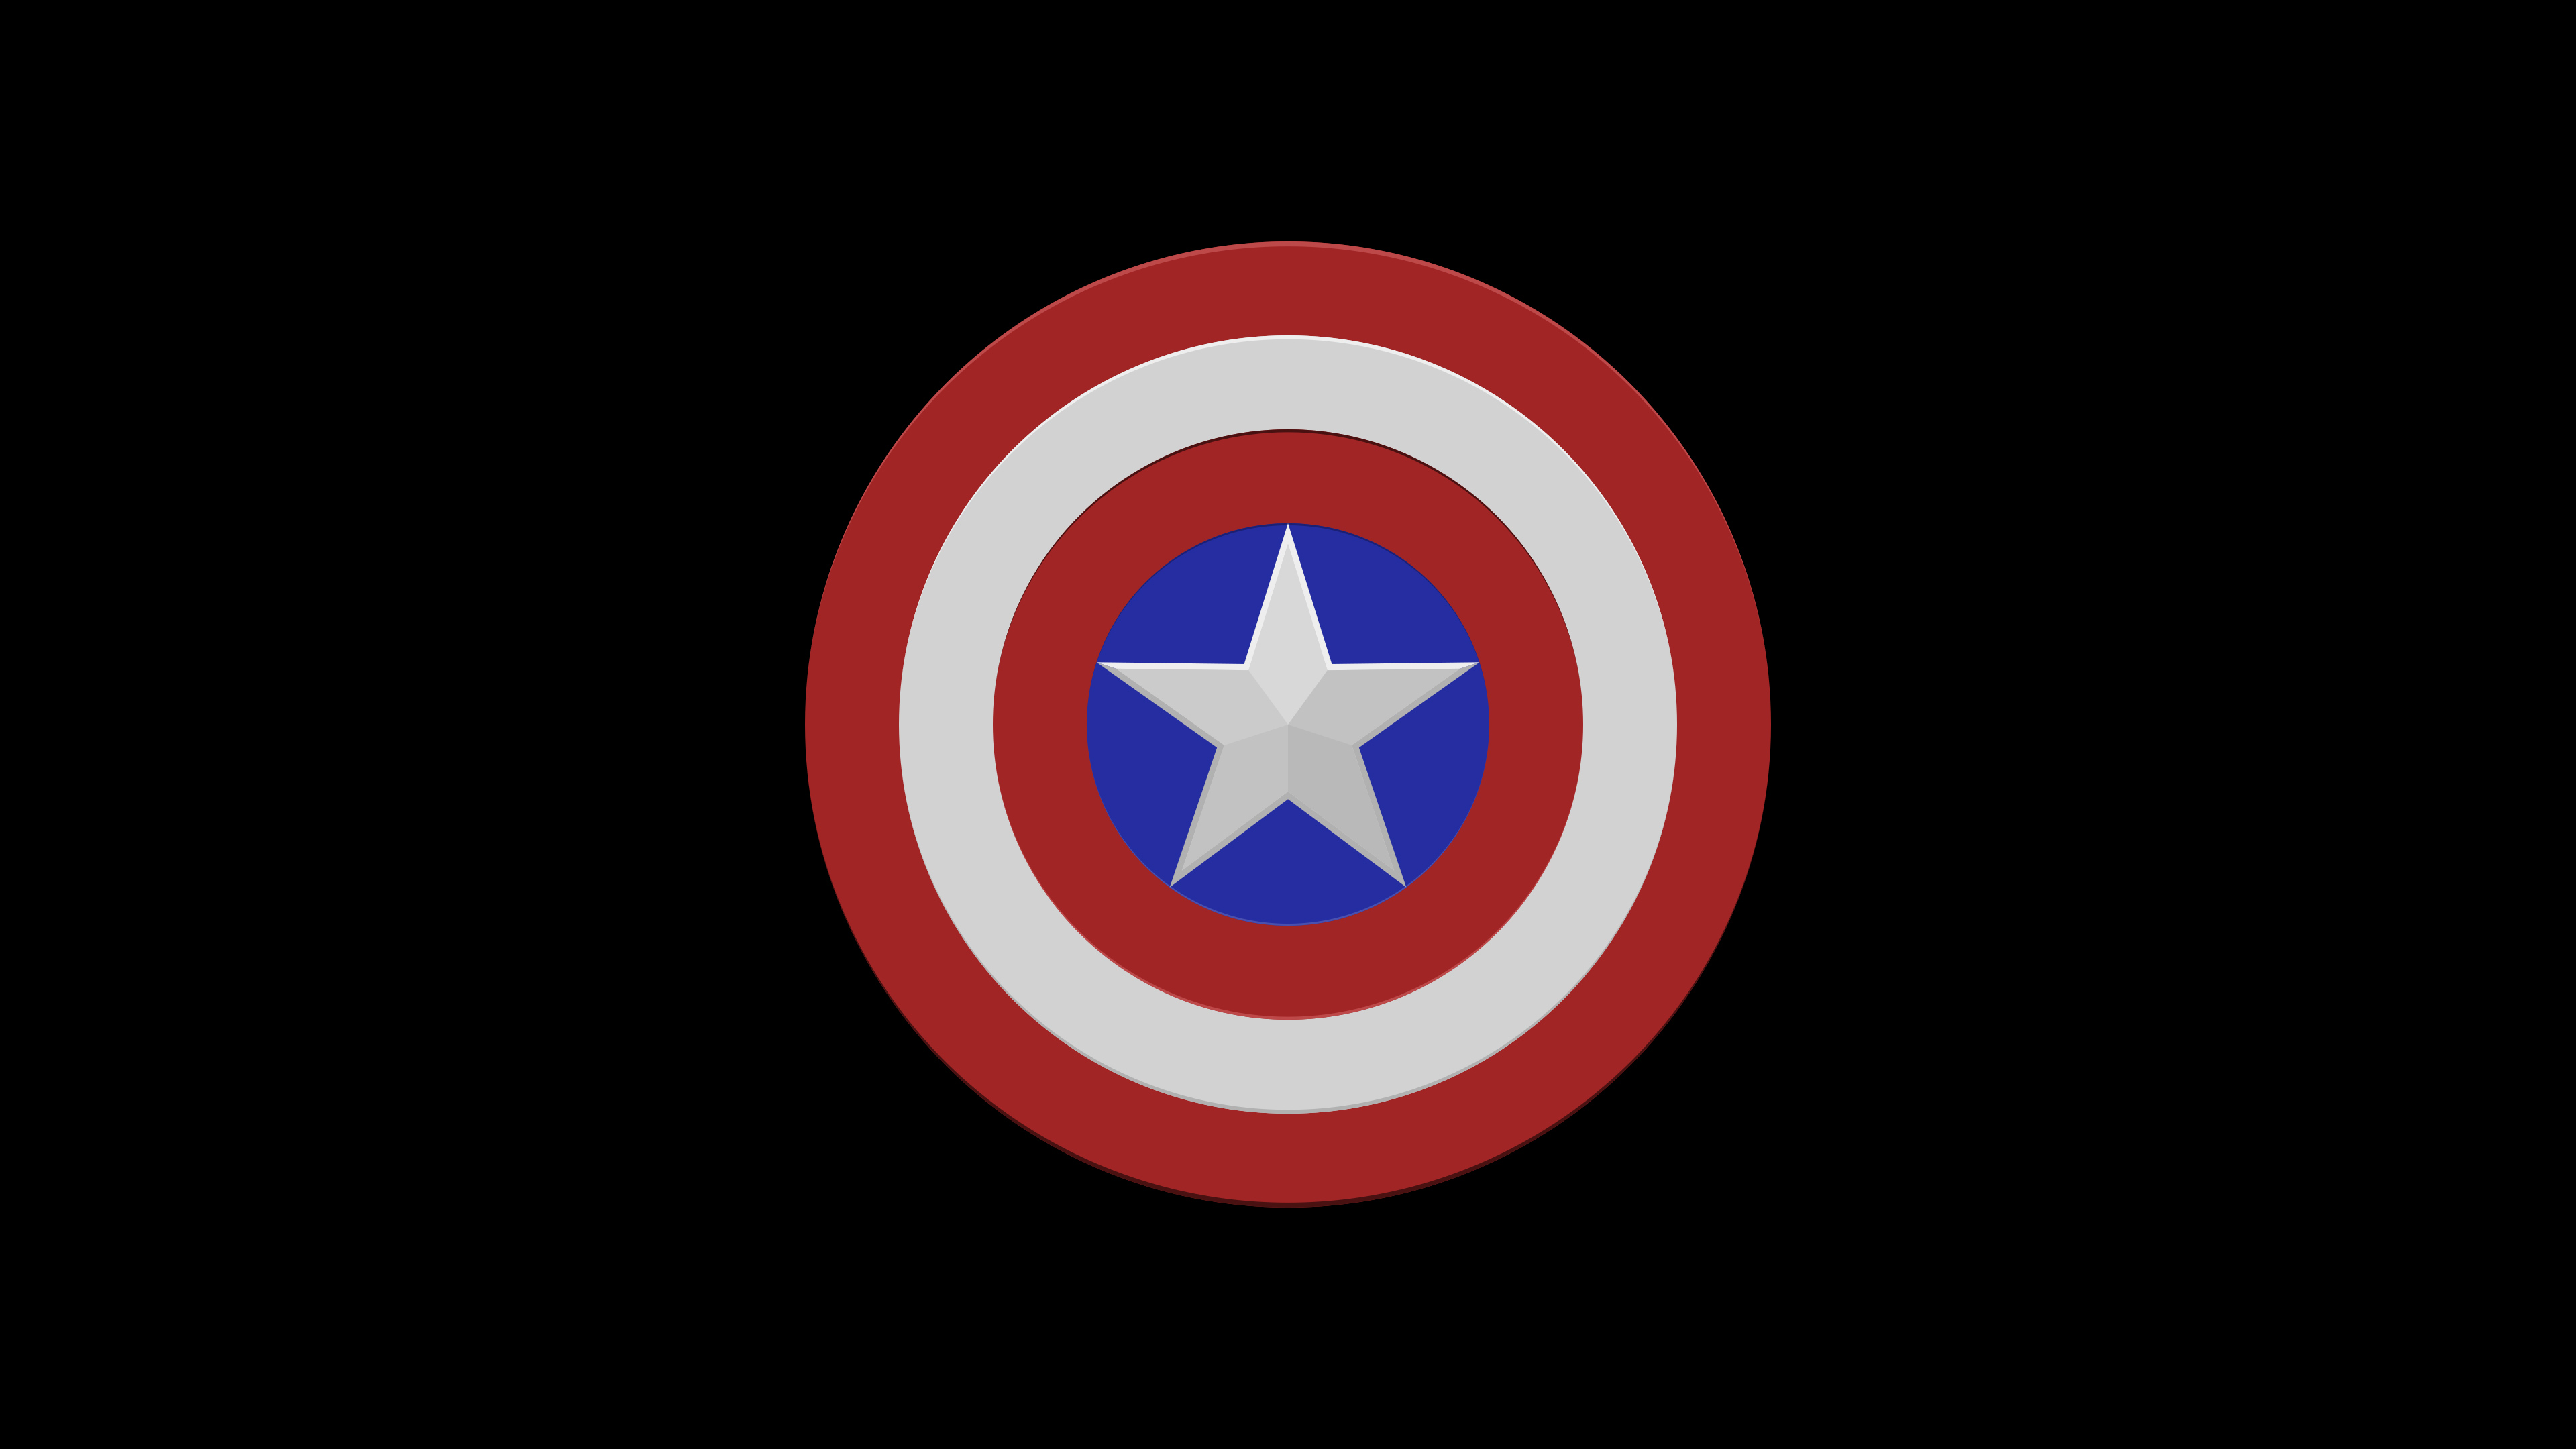 Captain America Shield Dark 4k Hd Superheroes 4k Wallpapers Images Backgrounds Photos And Pictures